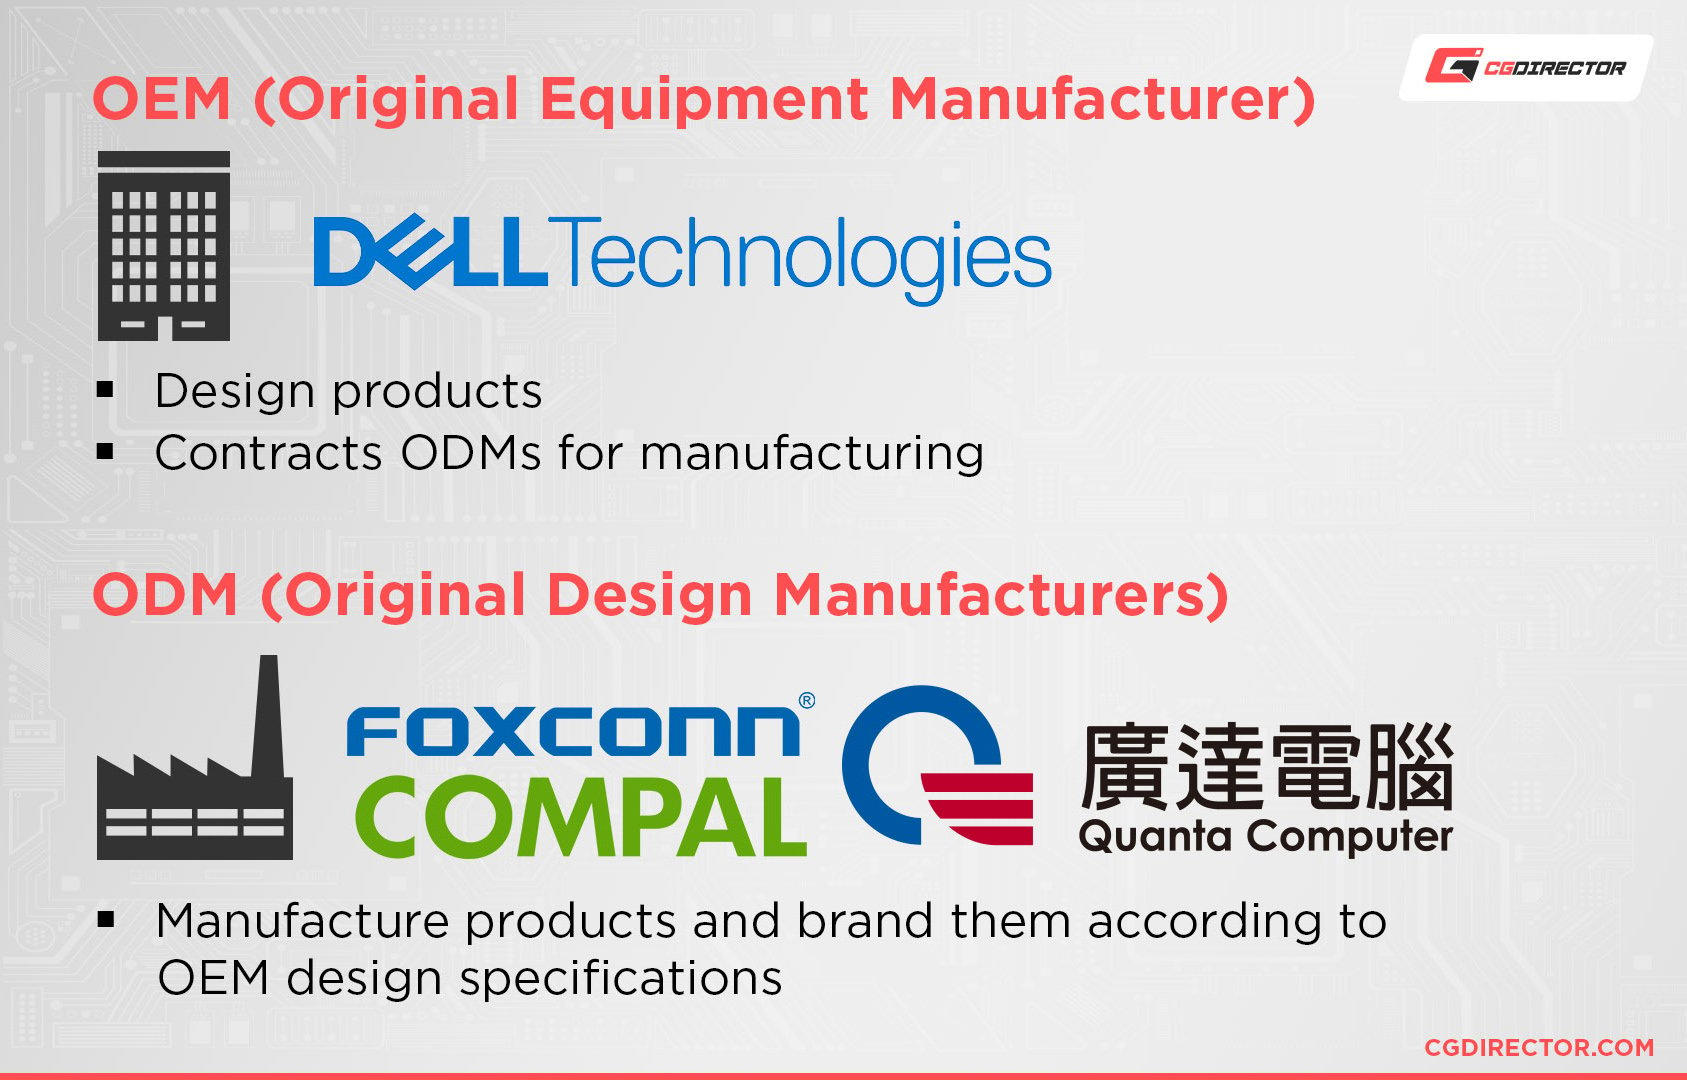 Where Are Dell Computers Made? [Mostly outside the US]